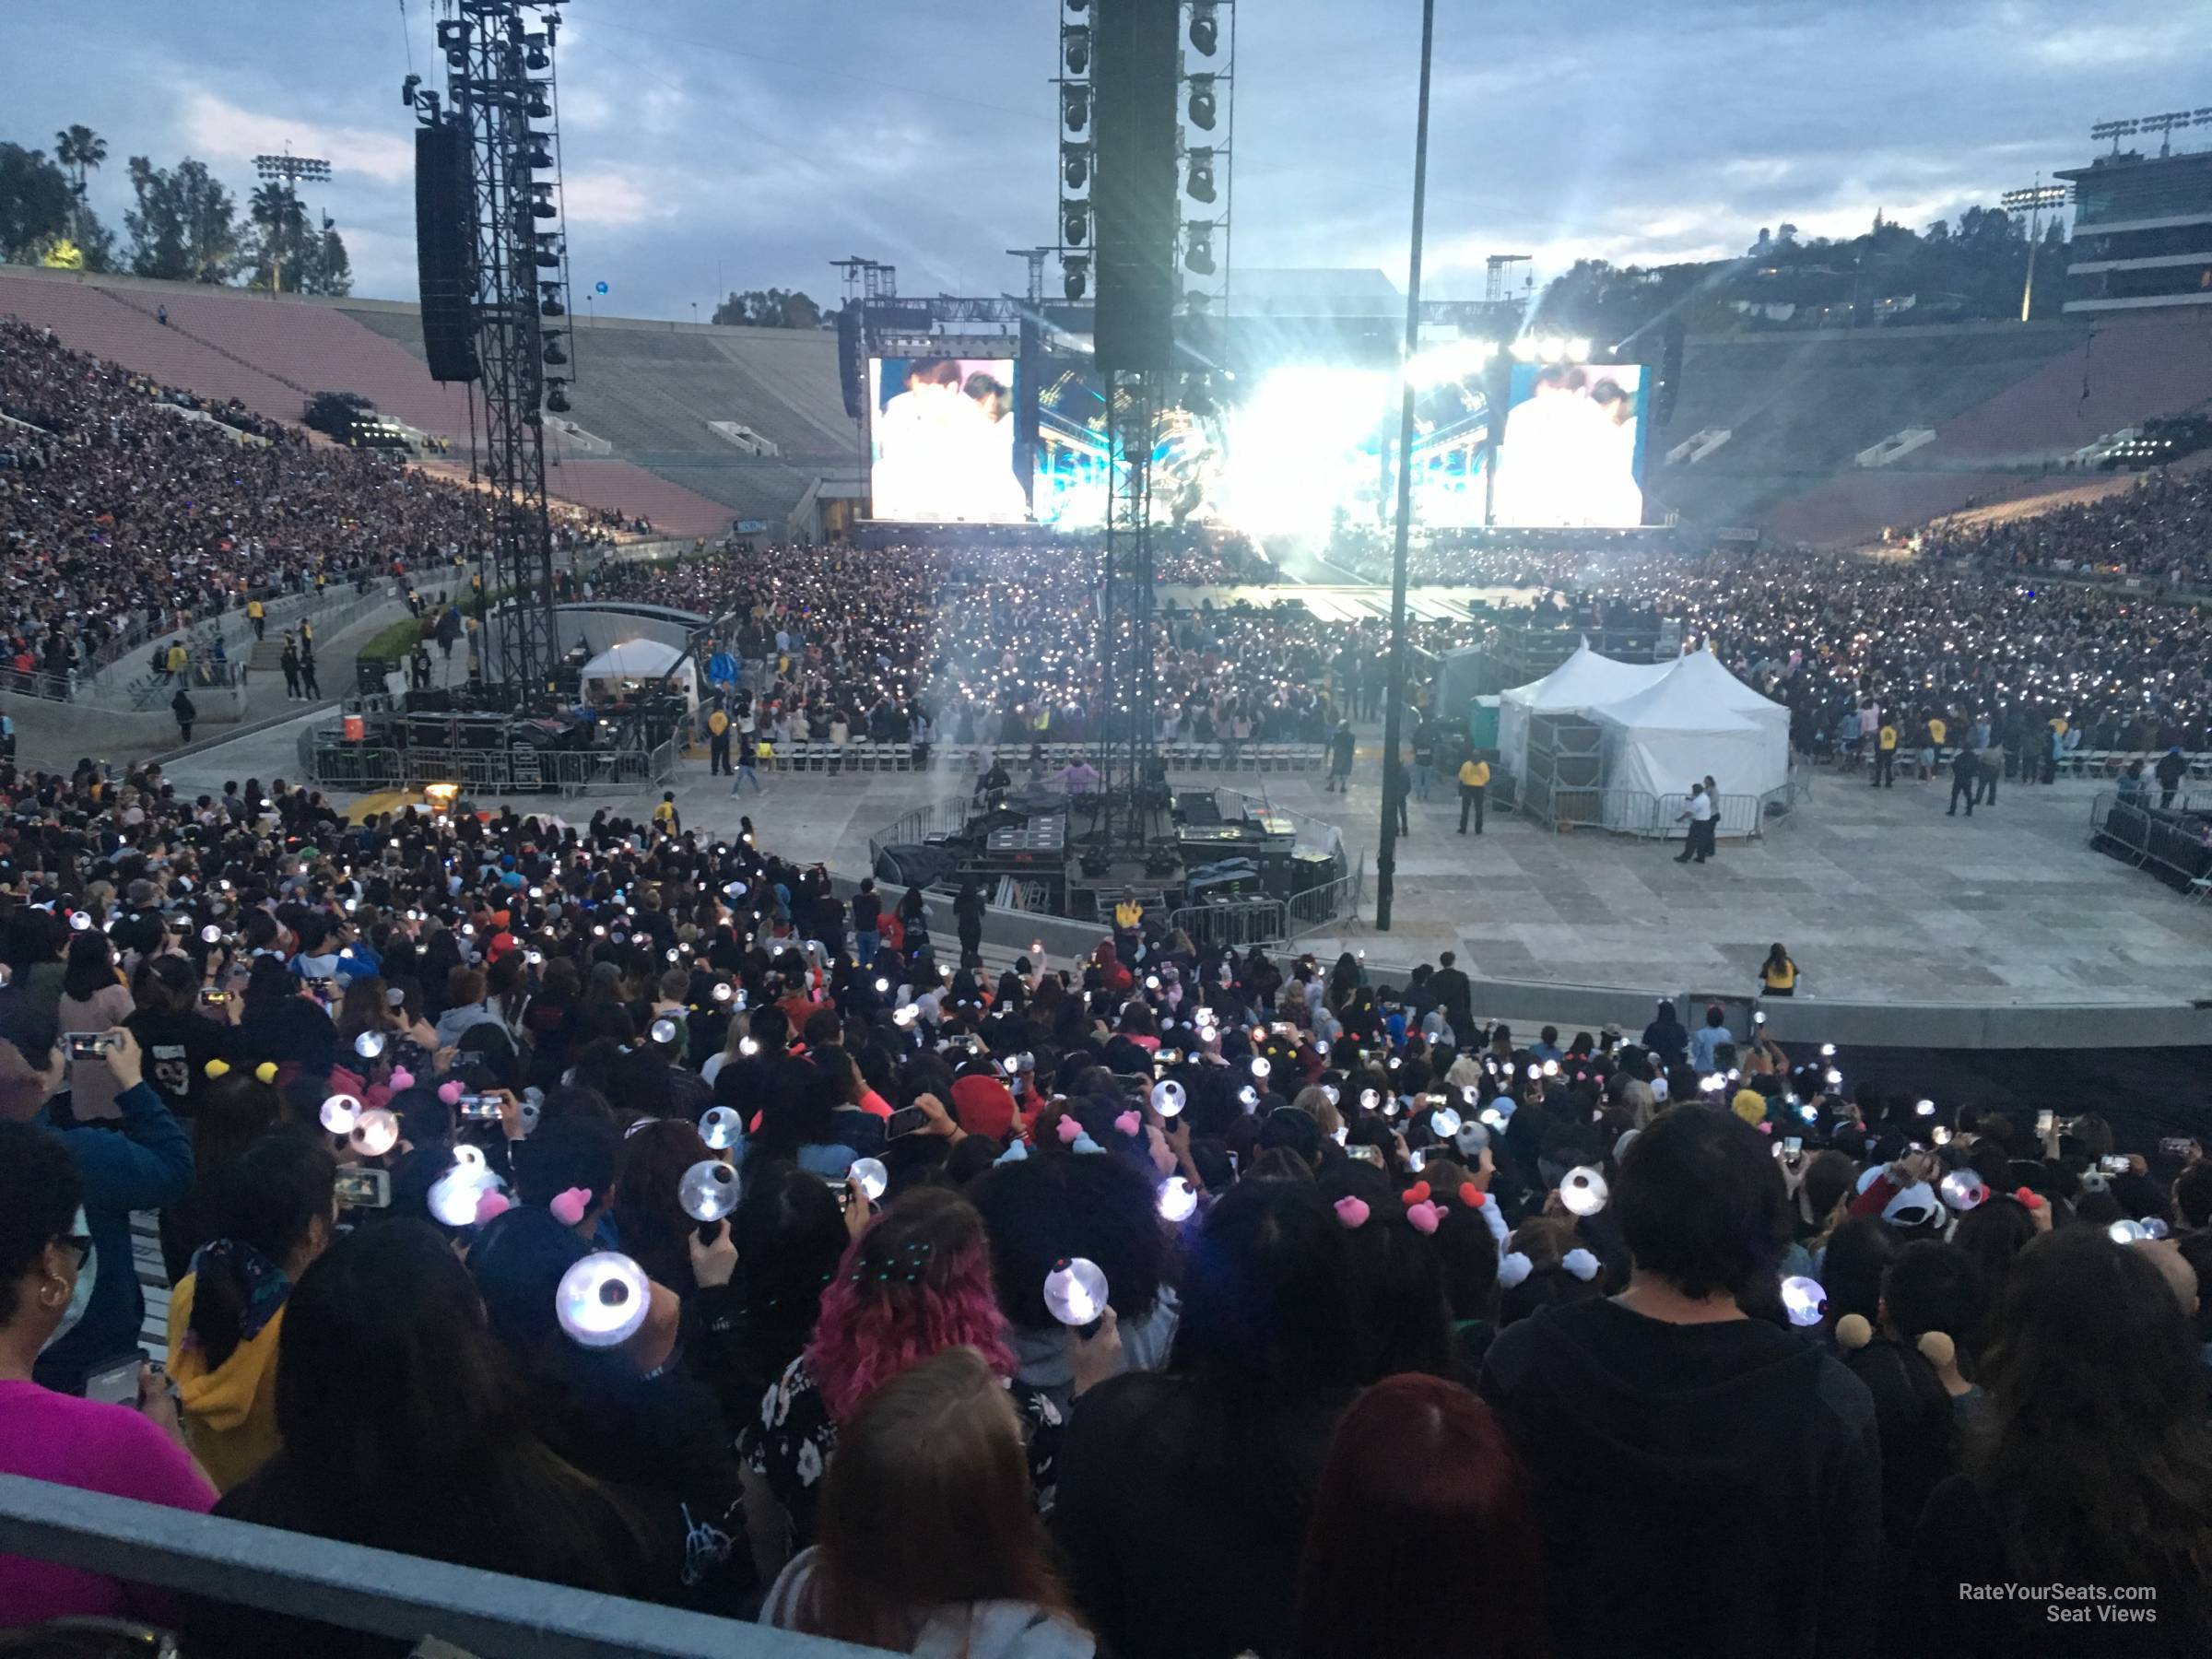 section 11, row 30 seat view  for concert - rose bowl stadium